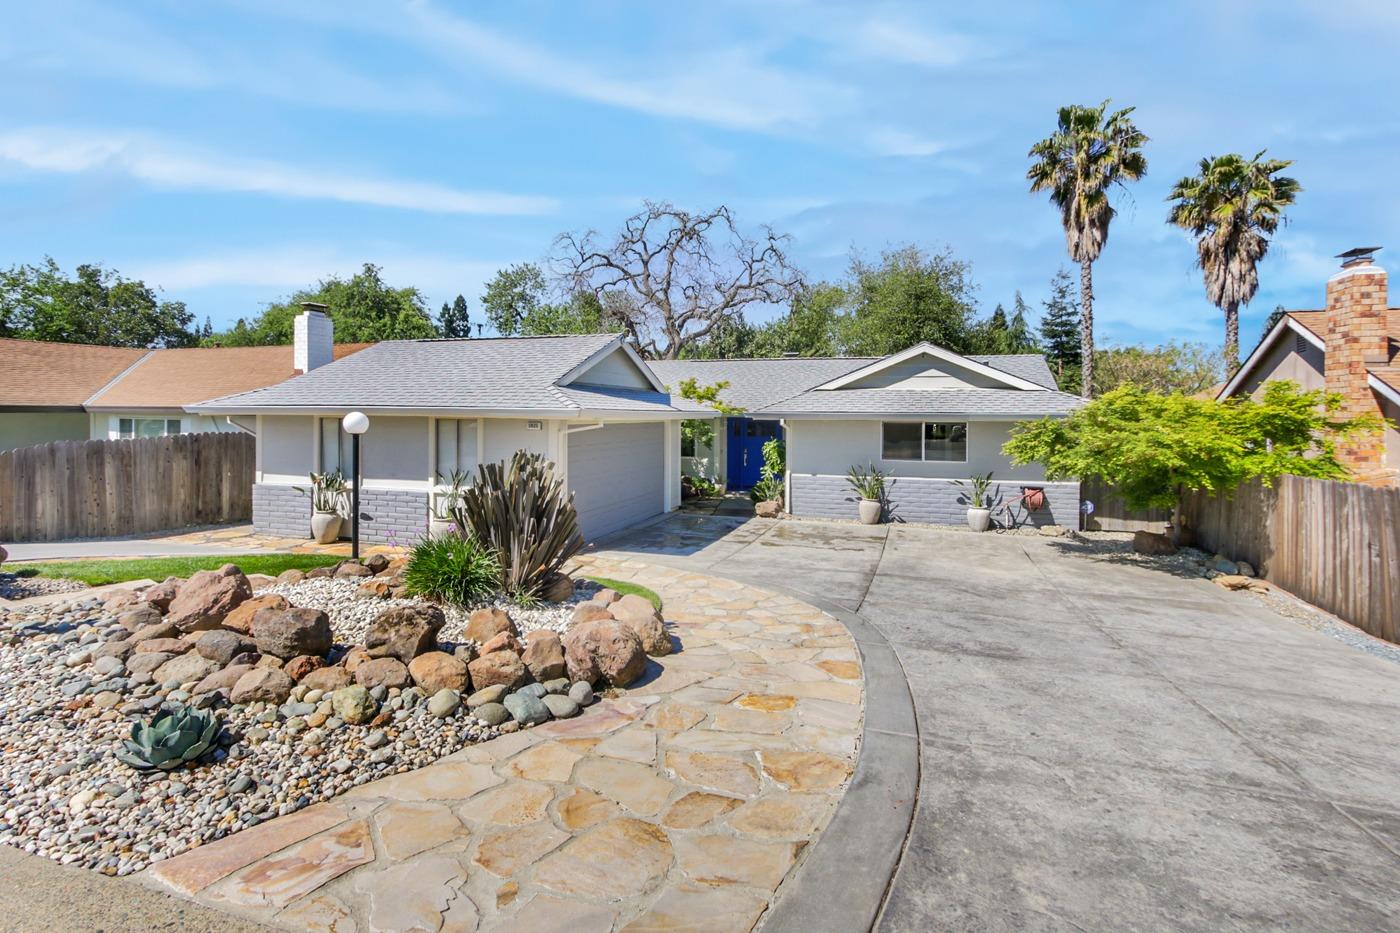 Located in the highly desirable Larchmont community, this remodeled house is something special.  Sta